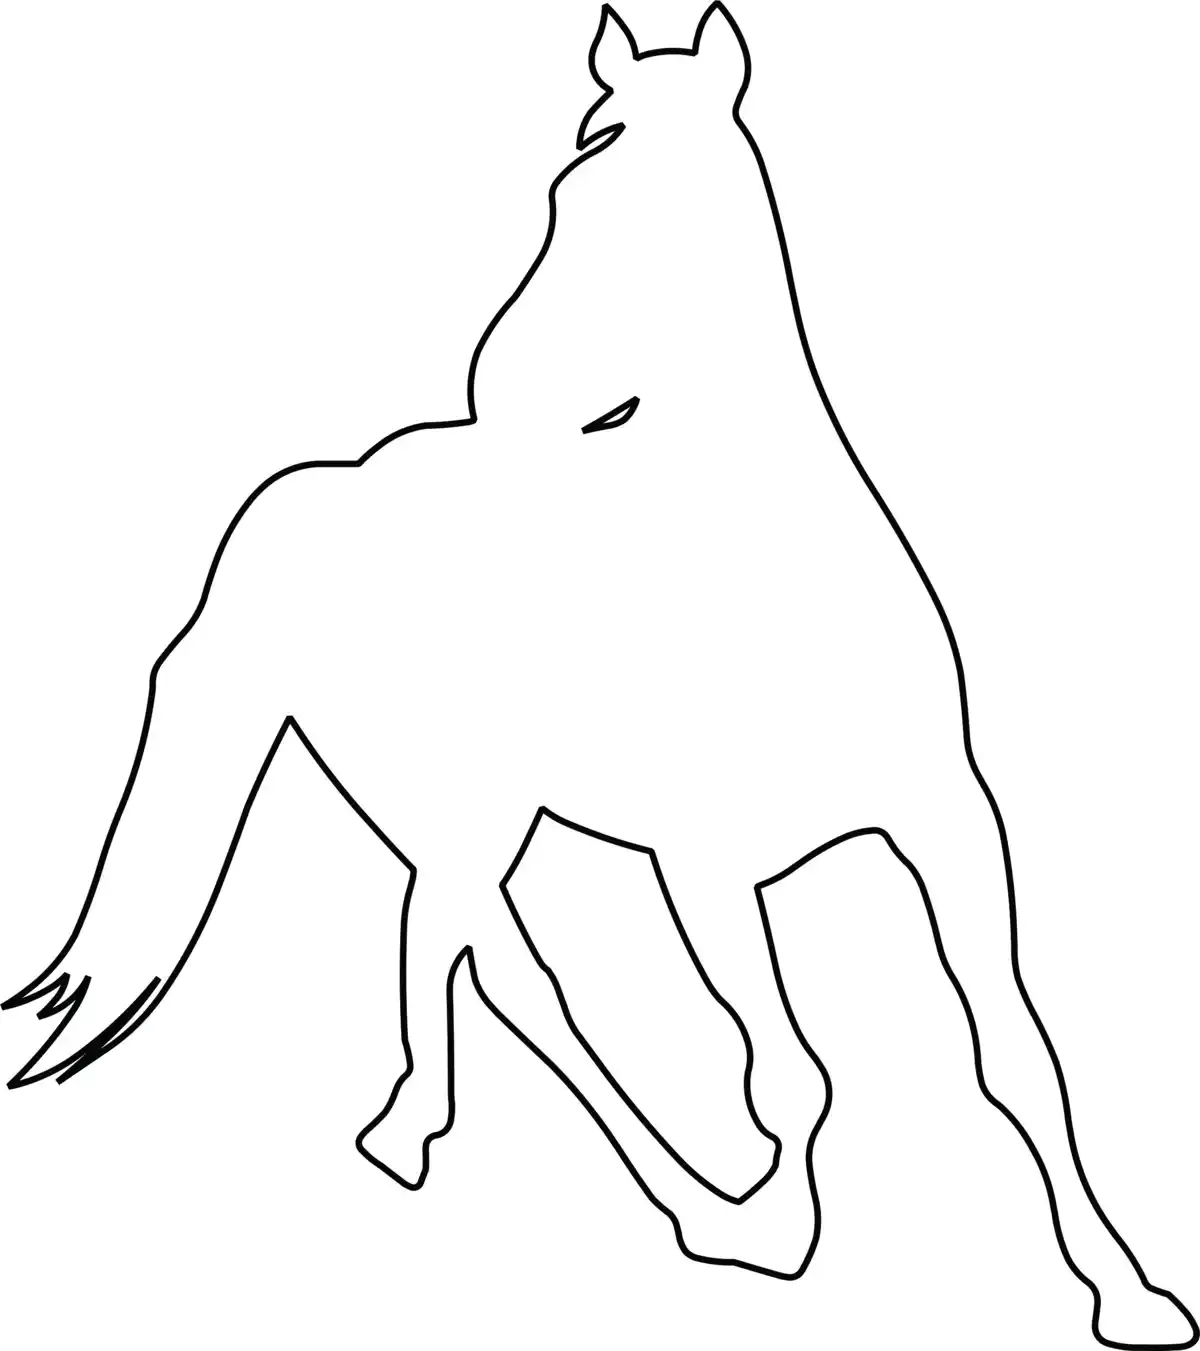 Free Coloring Pages PDF, Free Horse Coloring And Activity Coloring Pages Pdf